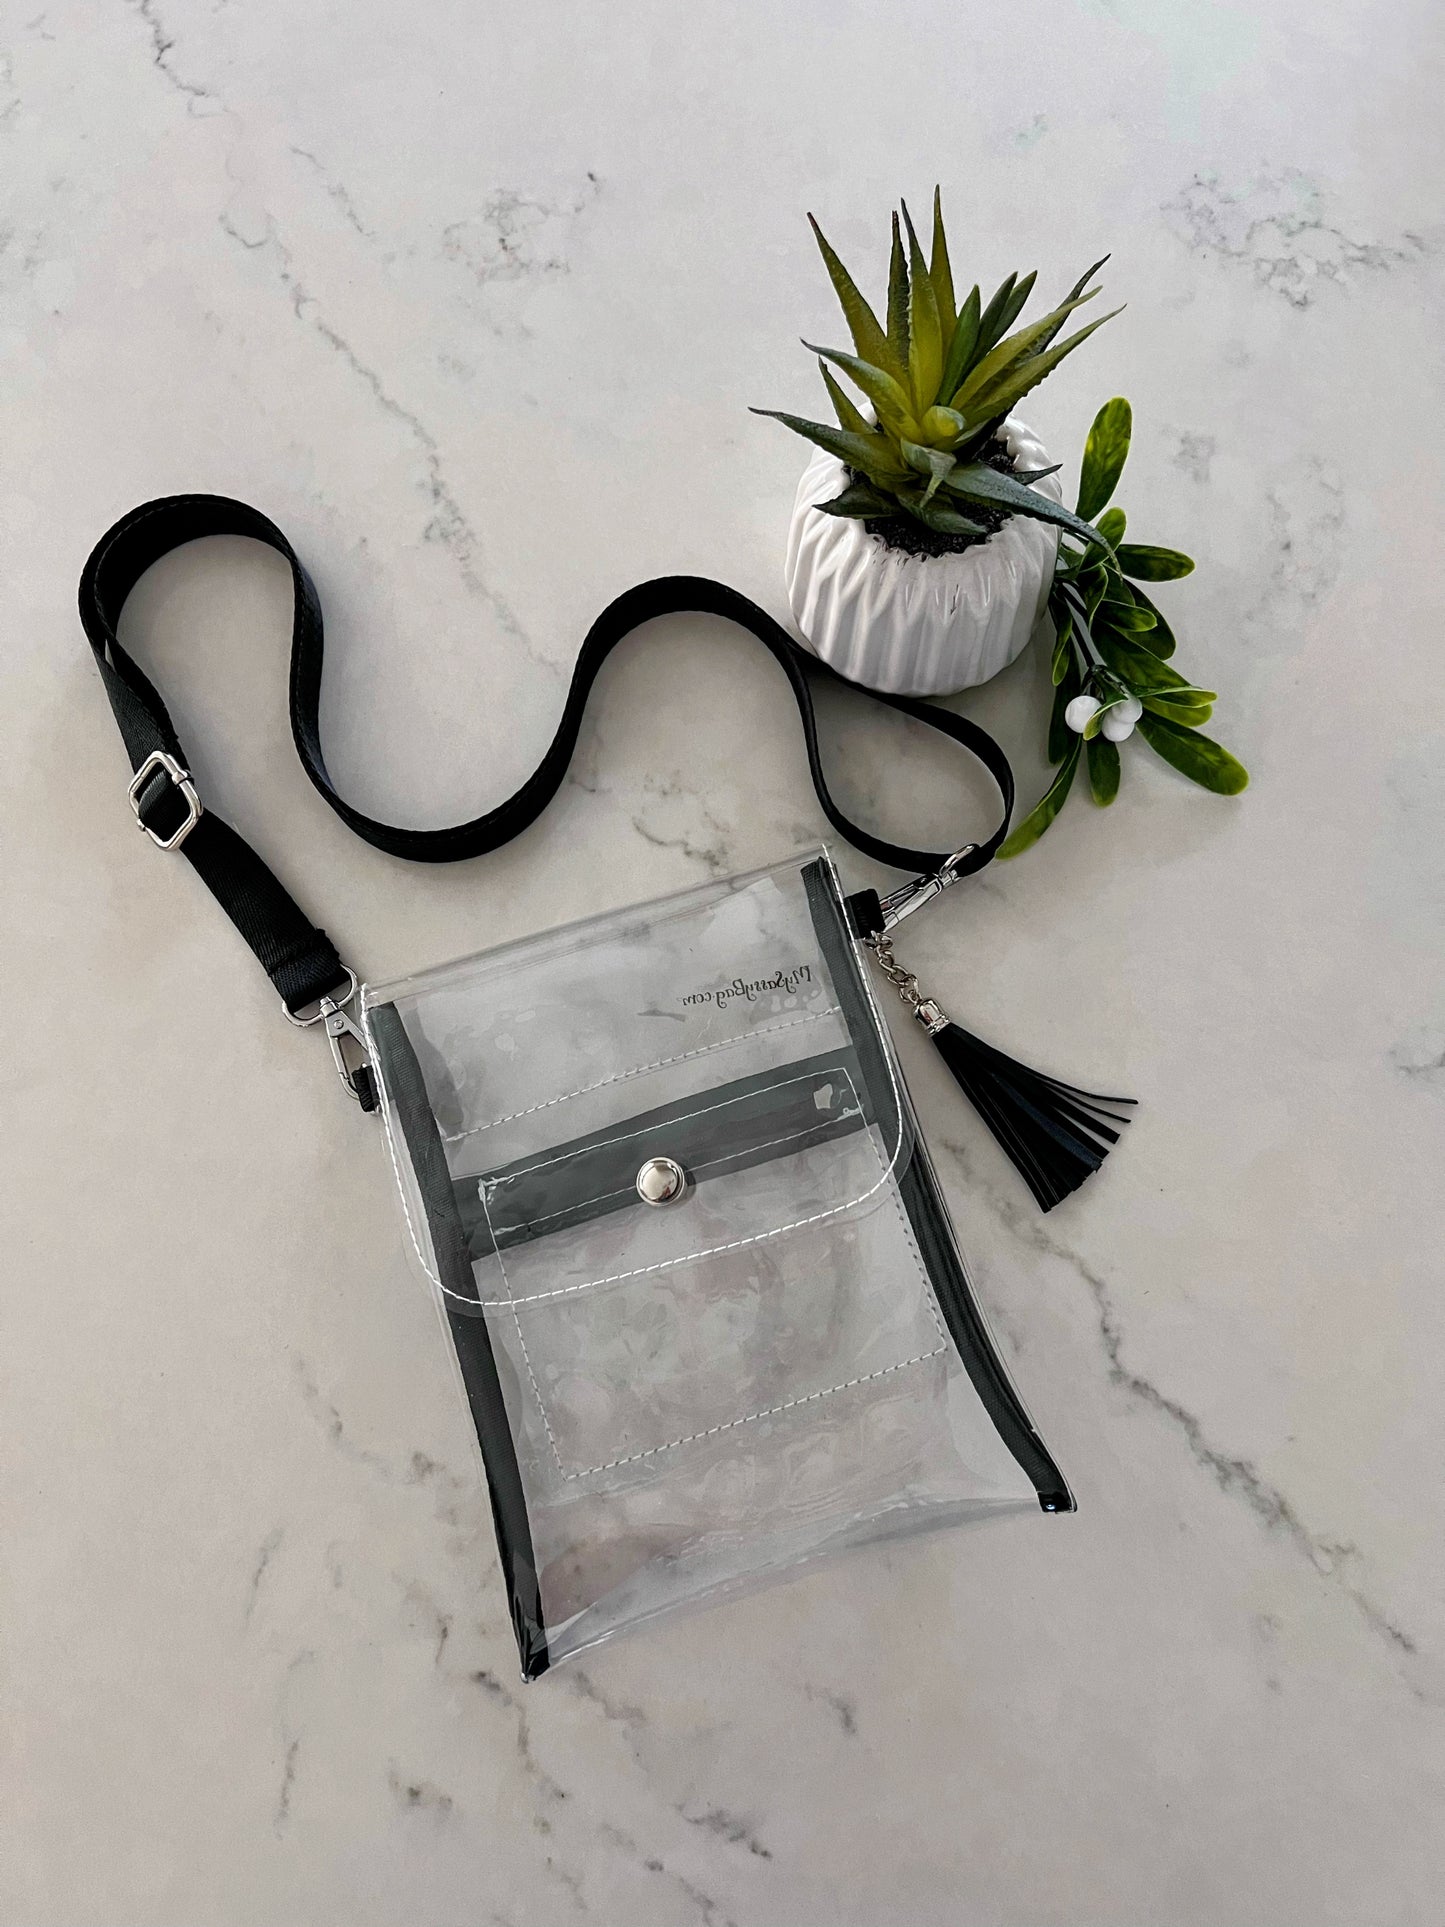 The Clear Stadium-Approved Crossbody Bag